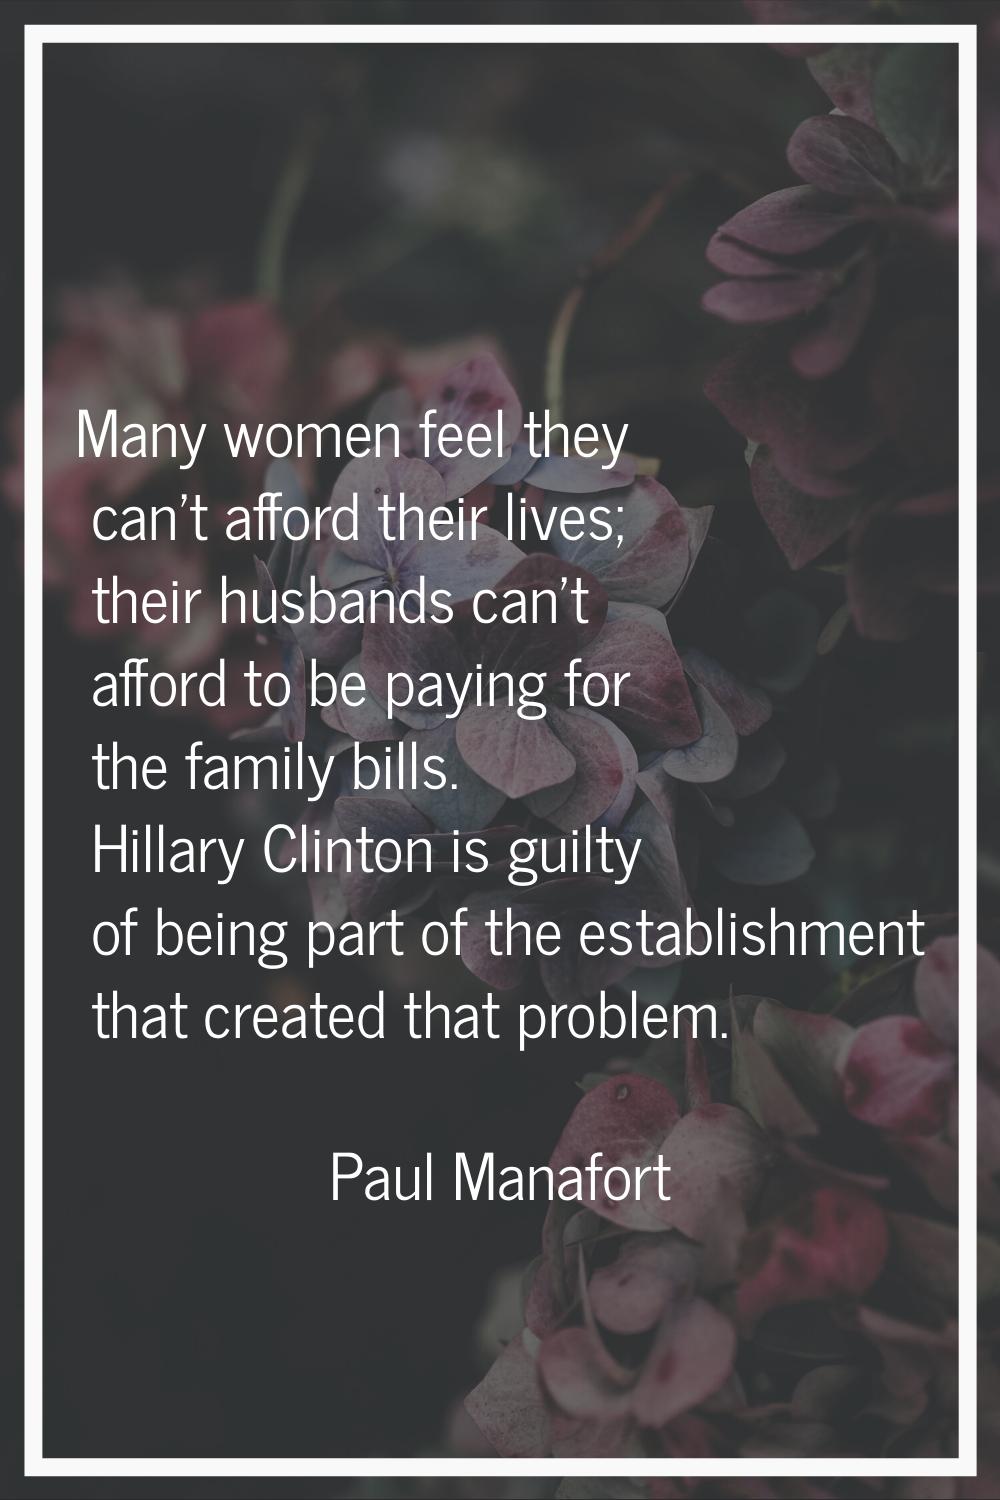 Many women feel they can't afford their lives; their husbands can't afford to be paying for the fam